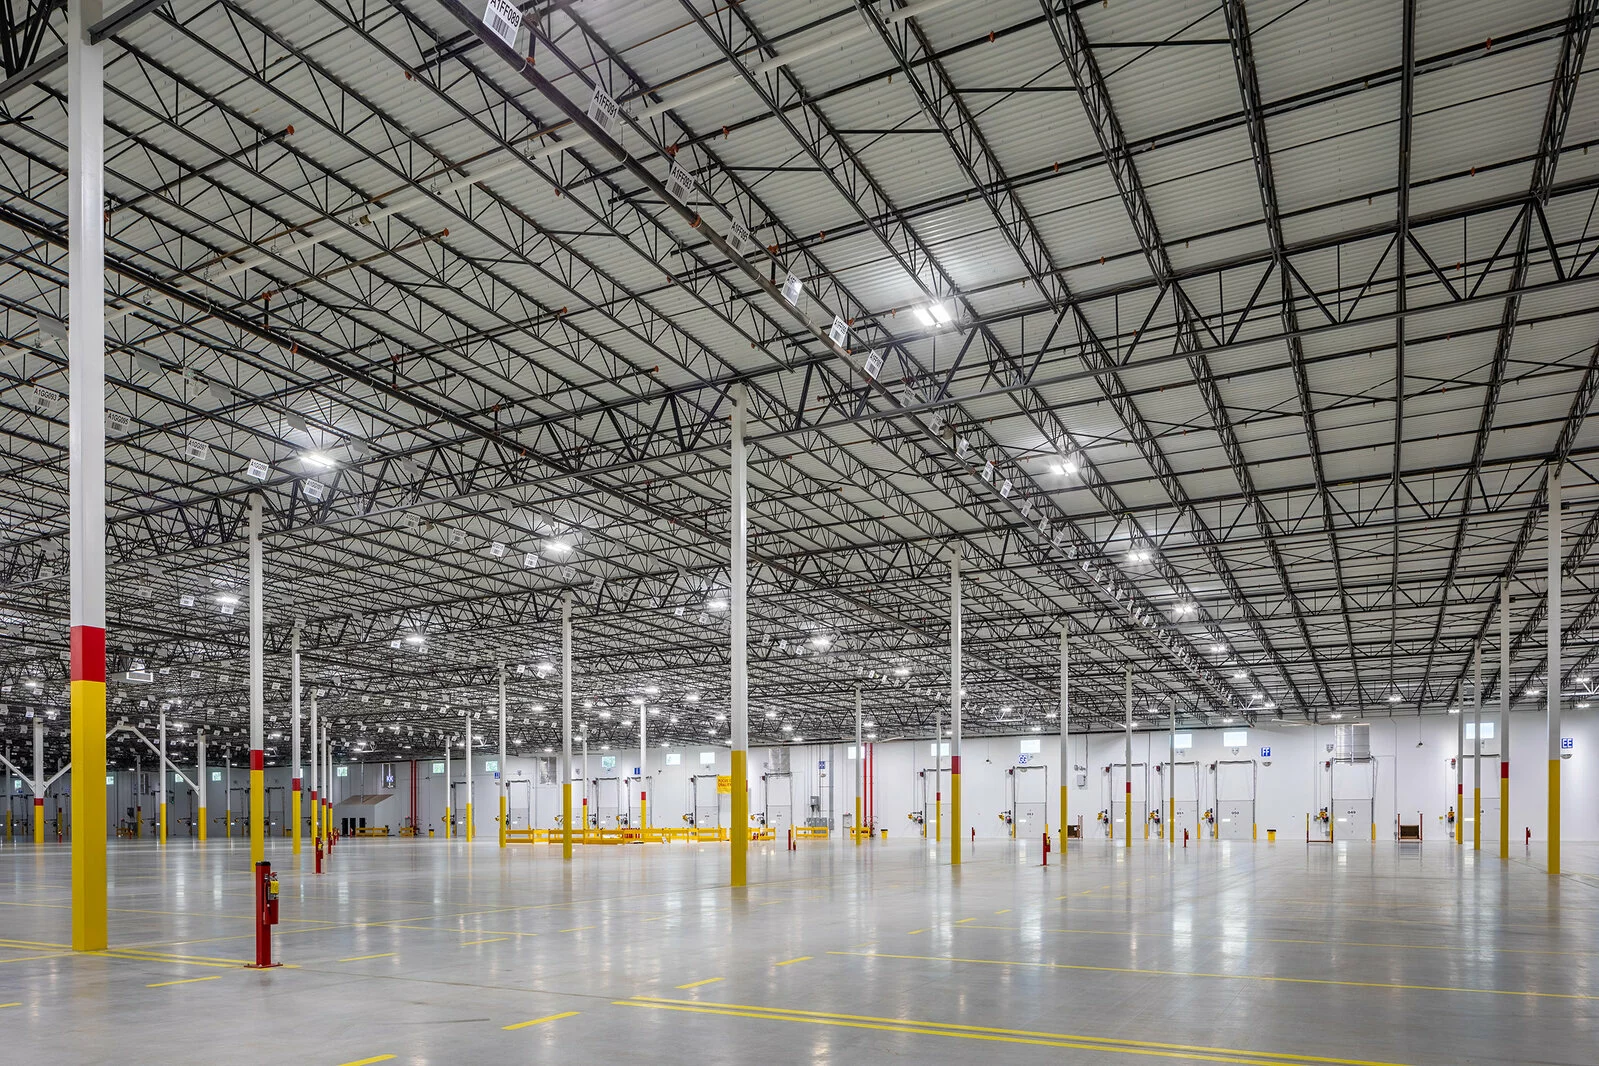 project fireball large interior of facility, red and yellow beams, bright lights, flooring with yellow markings.